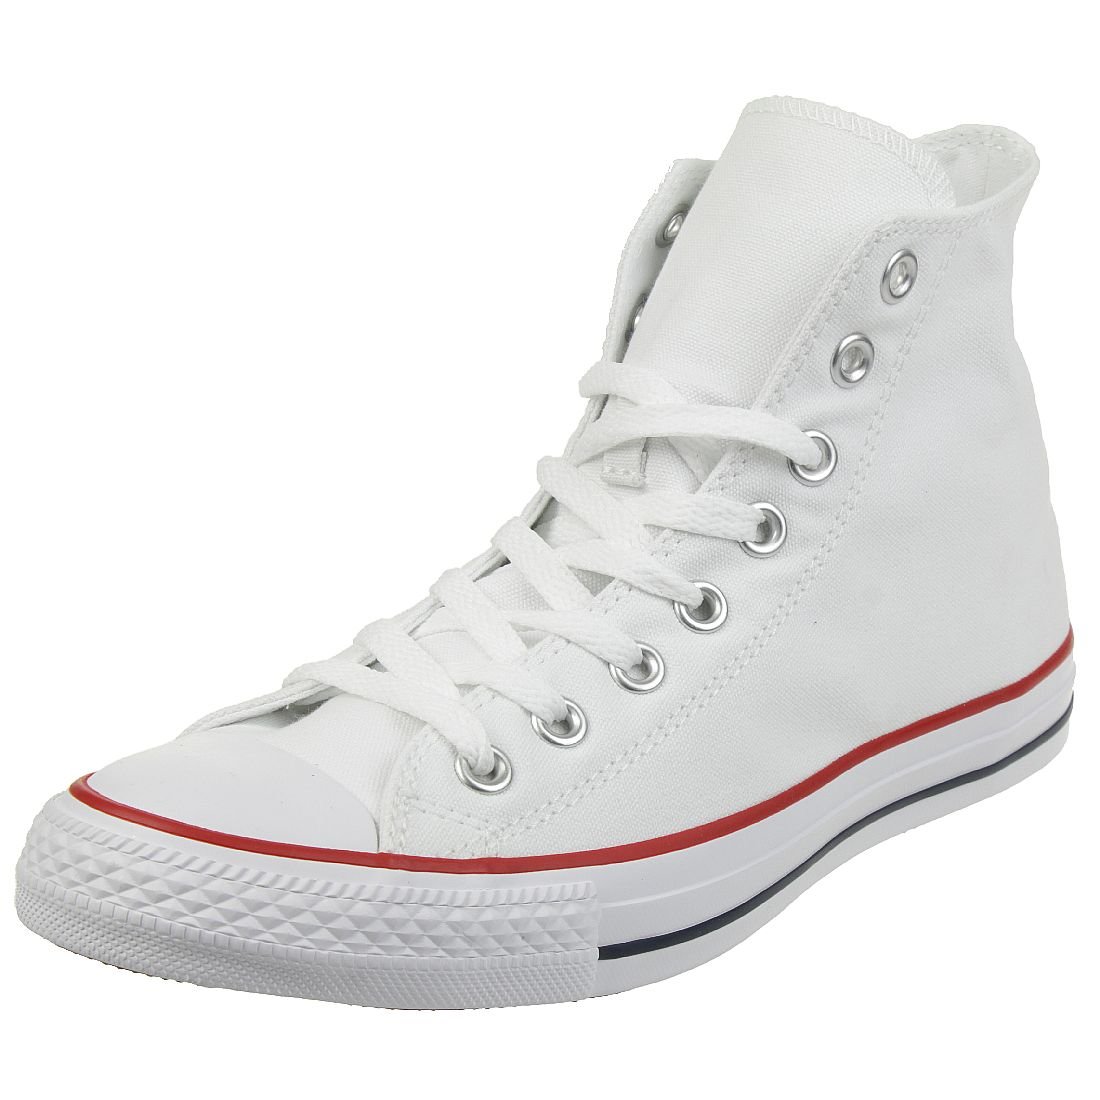 Converse Women's Chuck Taylor All Star Sneakers